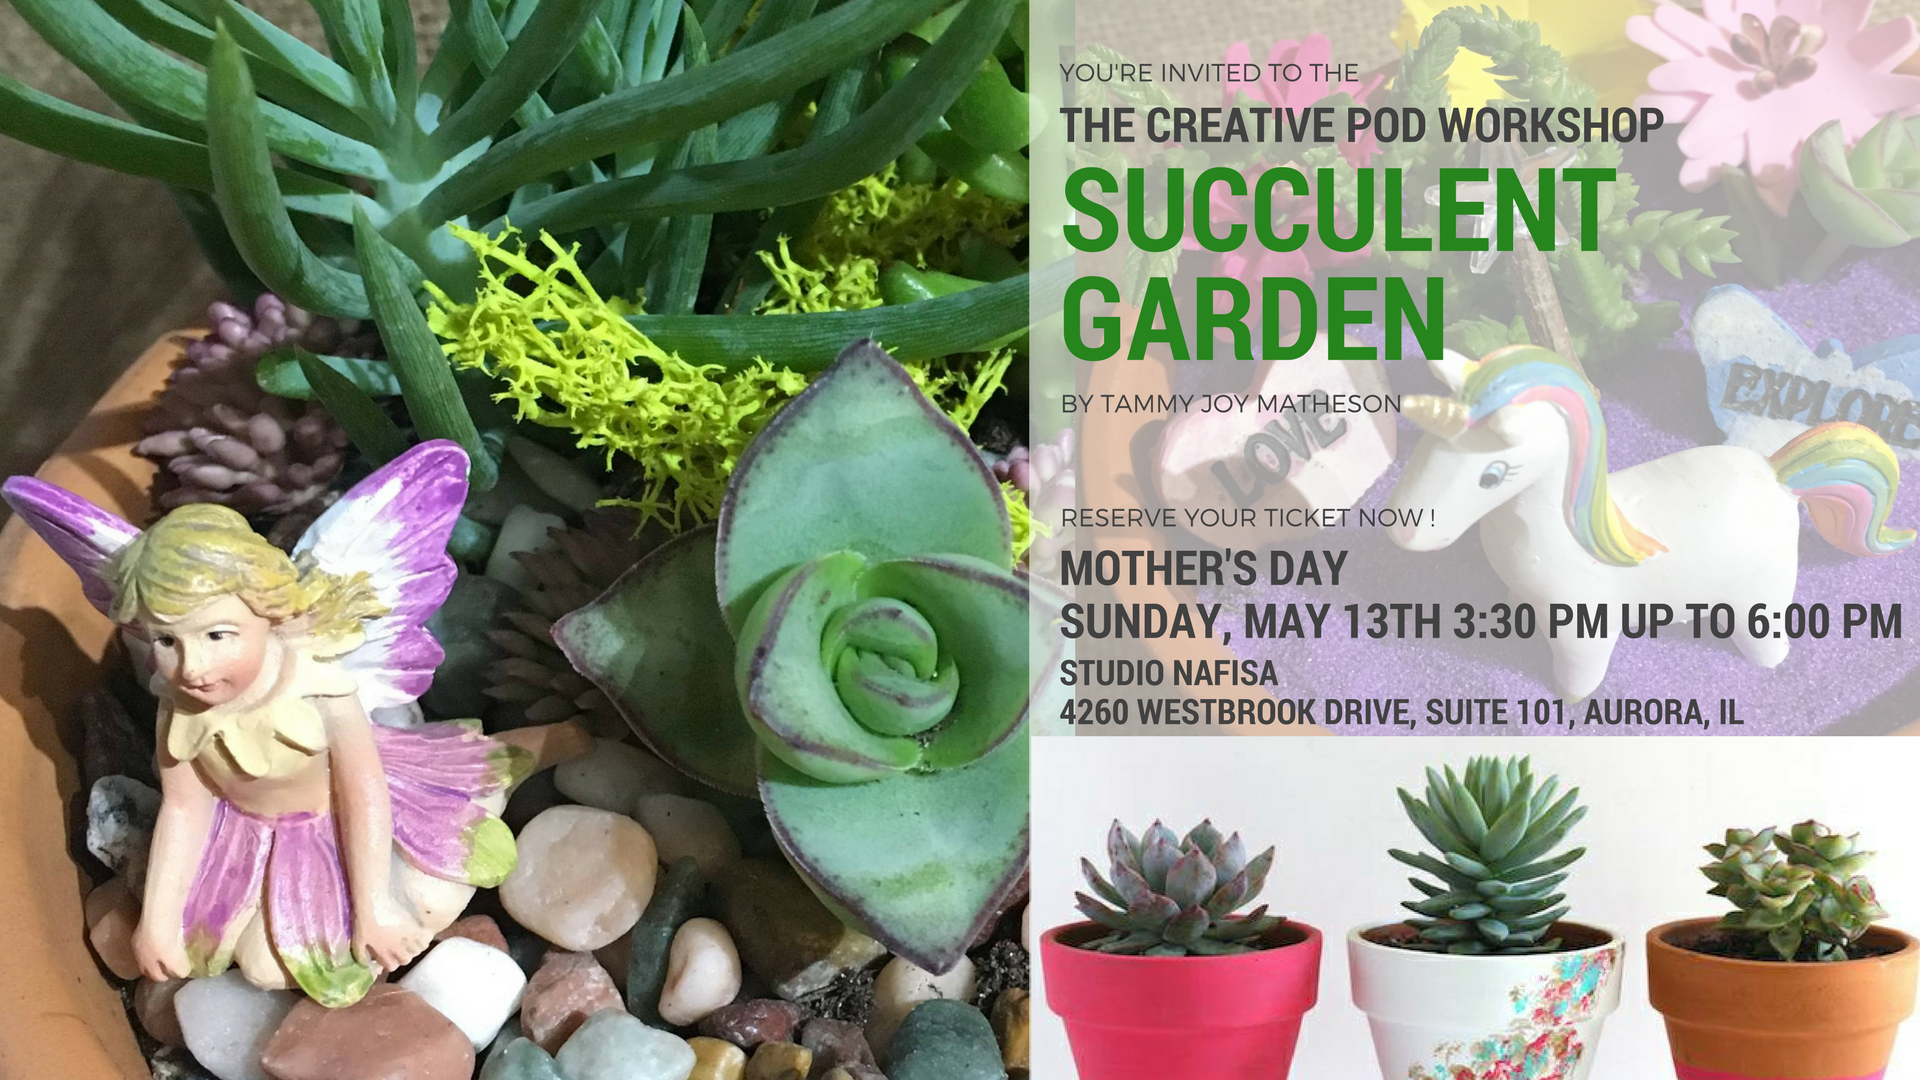 Succulent Garden Workshop - Mom and little ones make succulent gardens. Create your own potted garden with succulents and mini garden accessories.